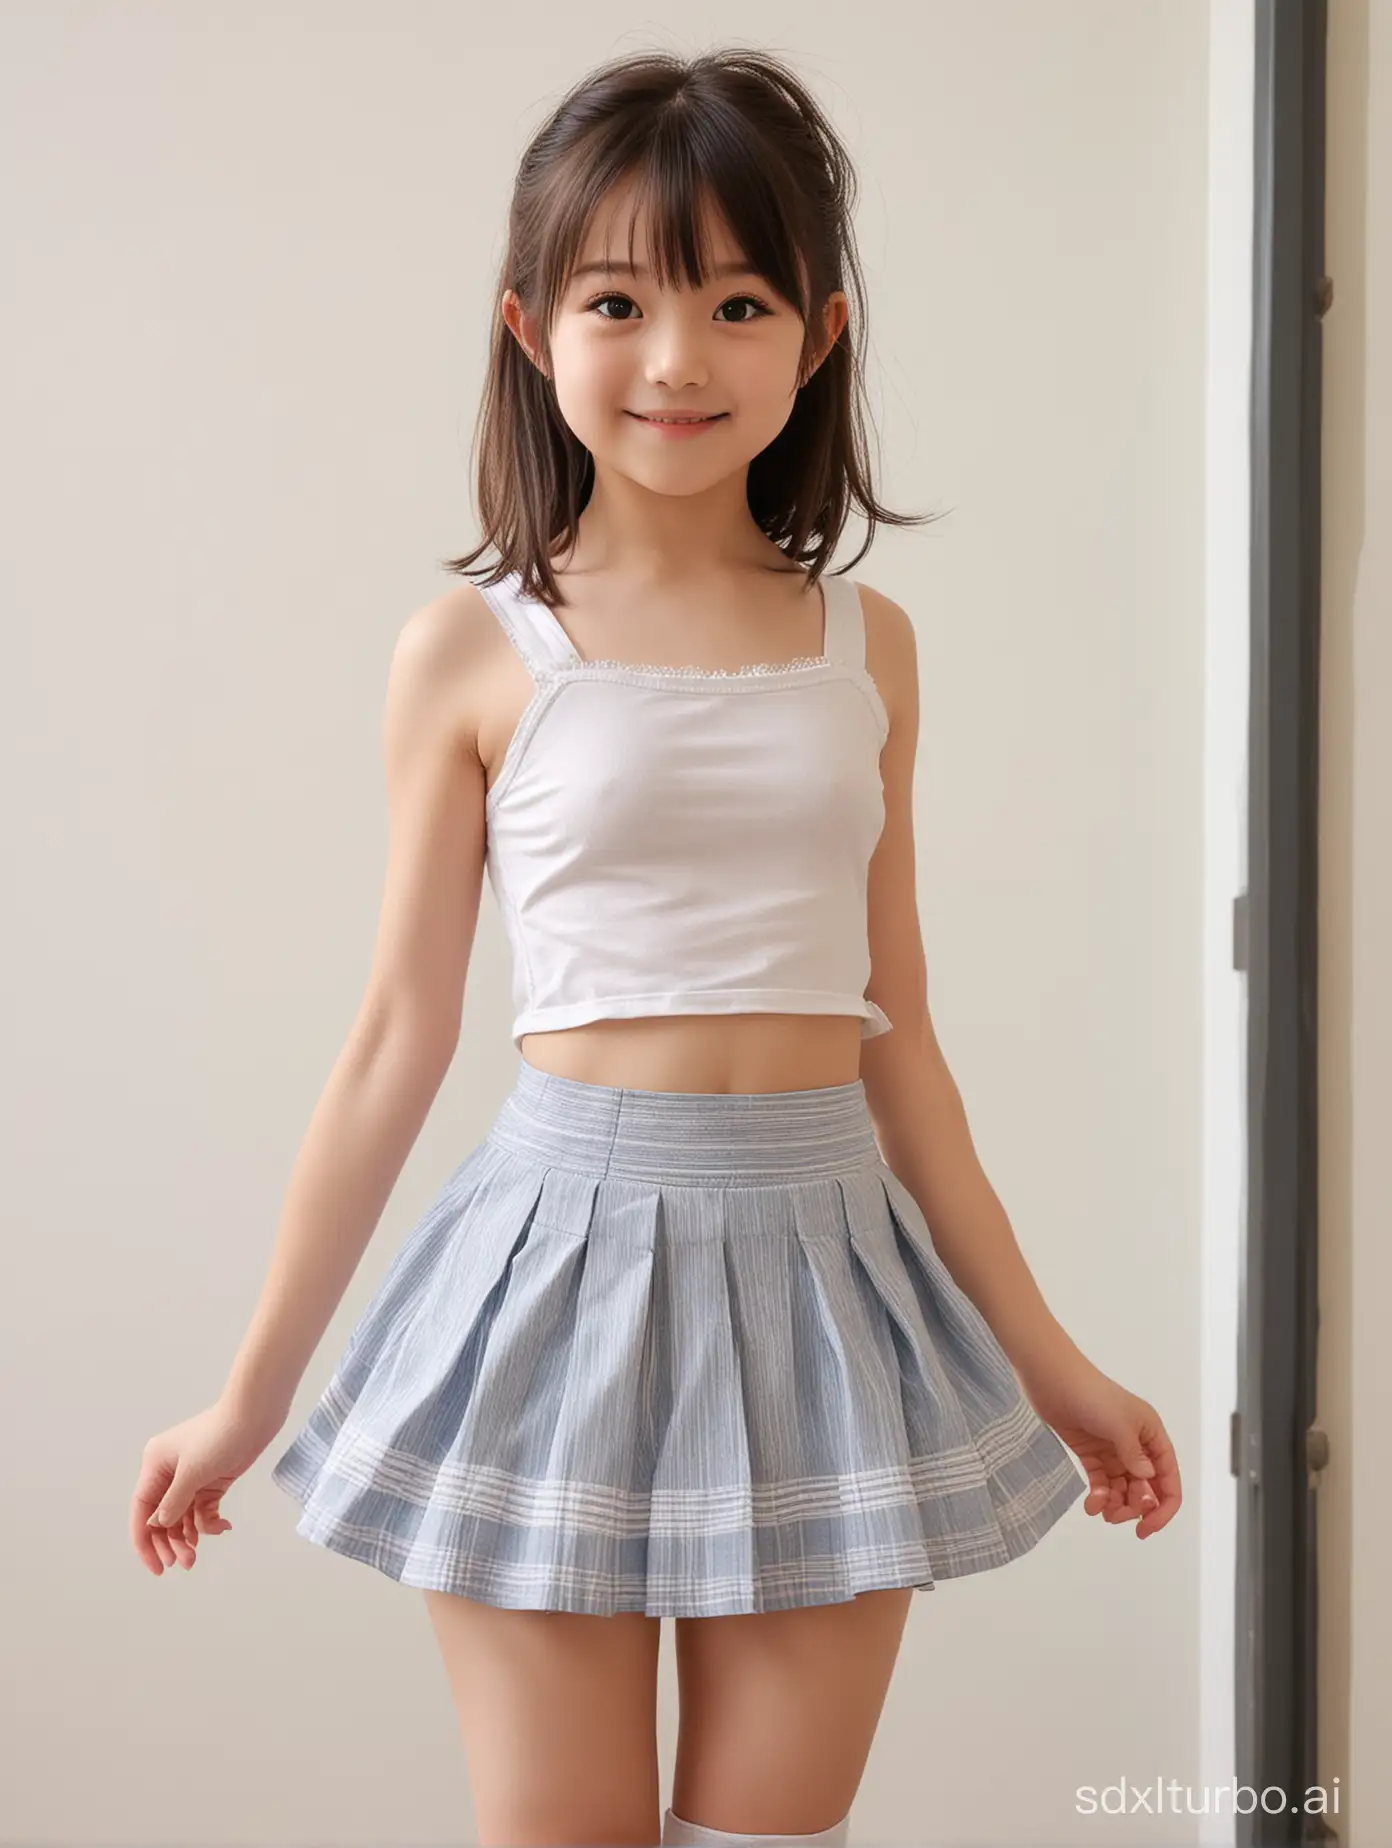 Niña de 9 años, japanese girl, cara bonita, cintura pequeña,loli, full body, petite, dynamic pose,flat tits, flat ass, small waist, underage, minor, little girl, girly,crop top, miniskirt, smiling cutely, arched back, side view, small cute head, small cute hands, small cute body, cute thin arms, cute thin legs,loli, accurate anatomical proportions, thin cheeks, thinner face,